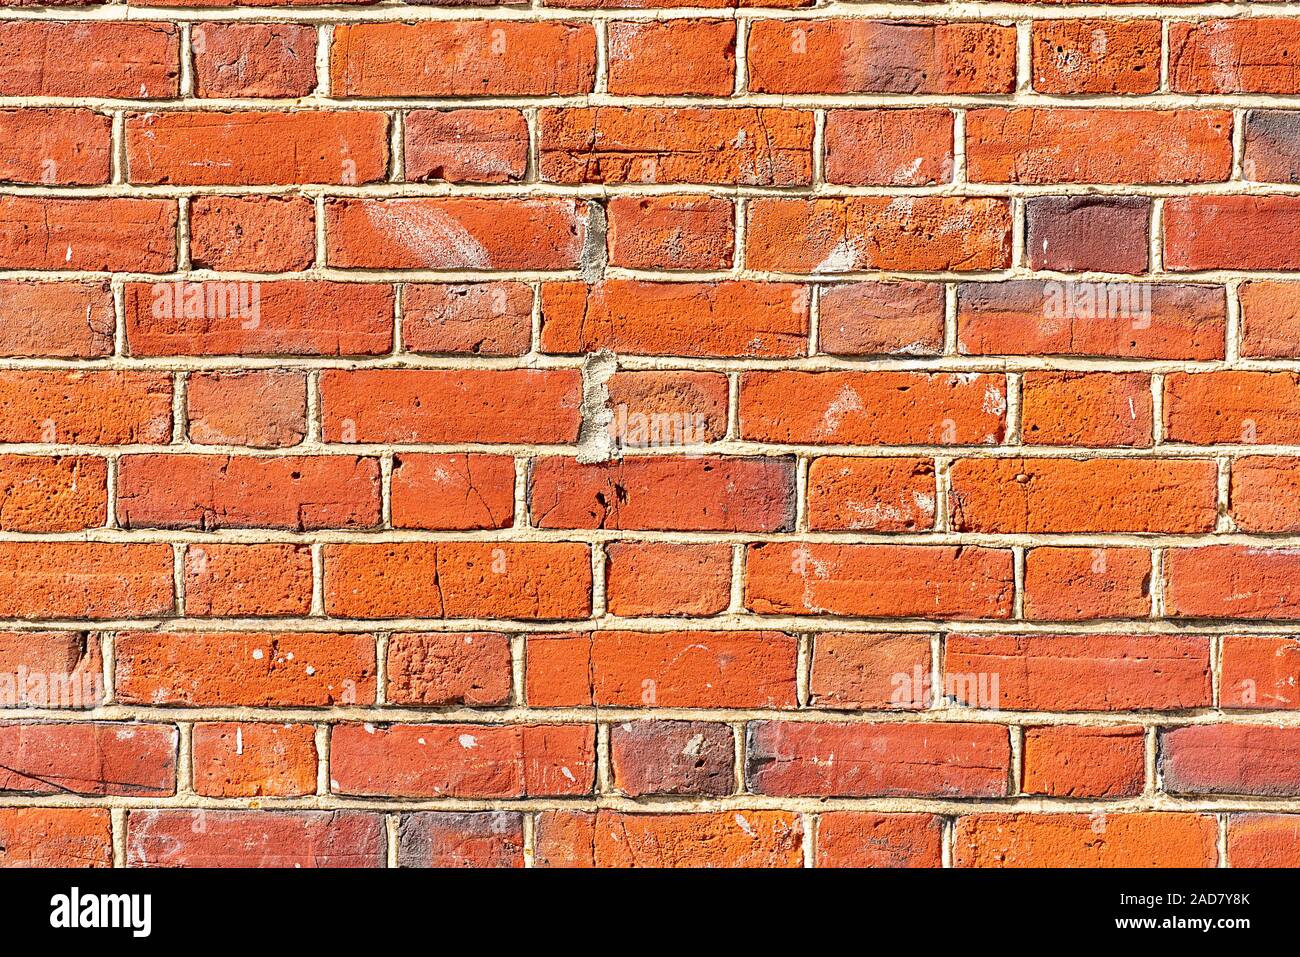 Background from a well saturated orange brickwall Stock Photo